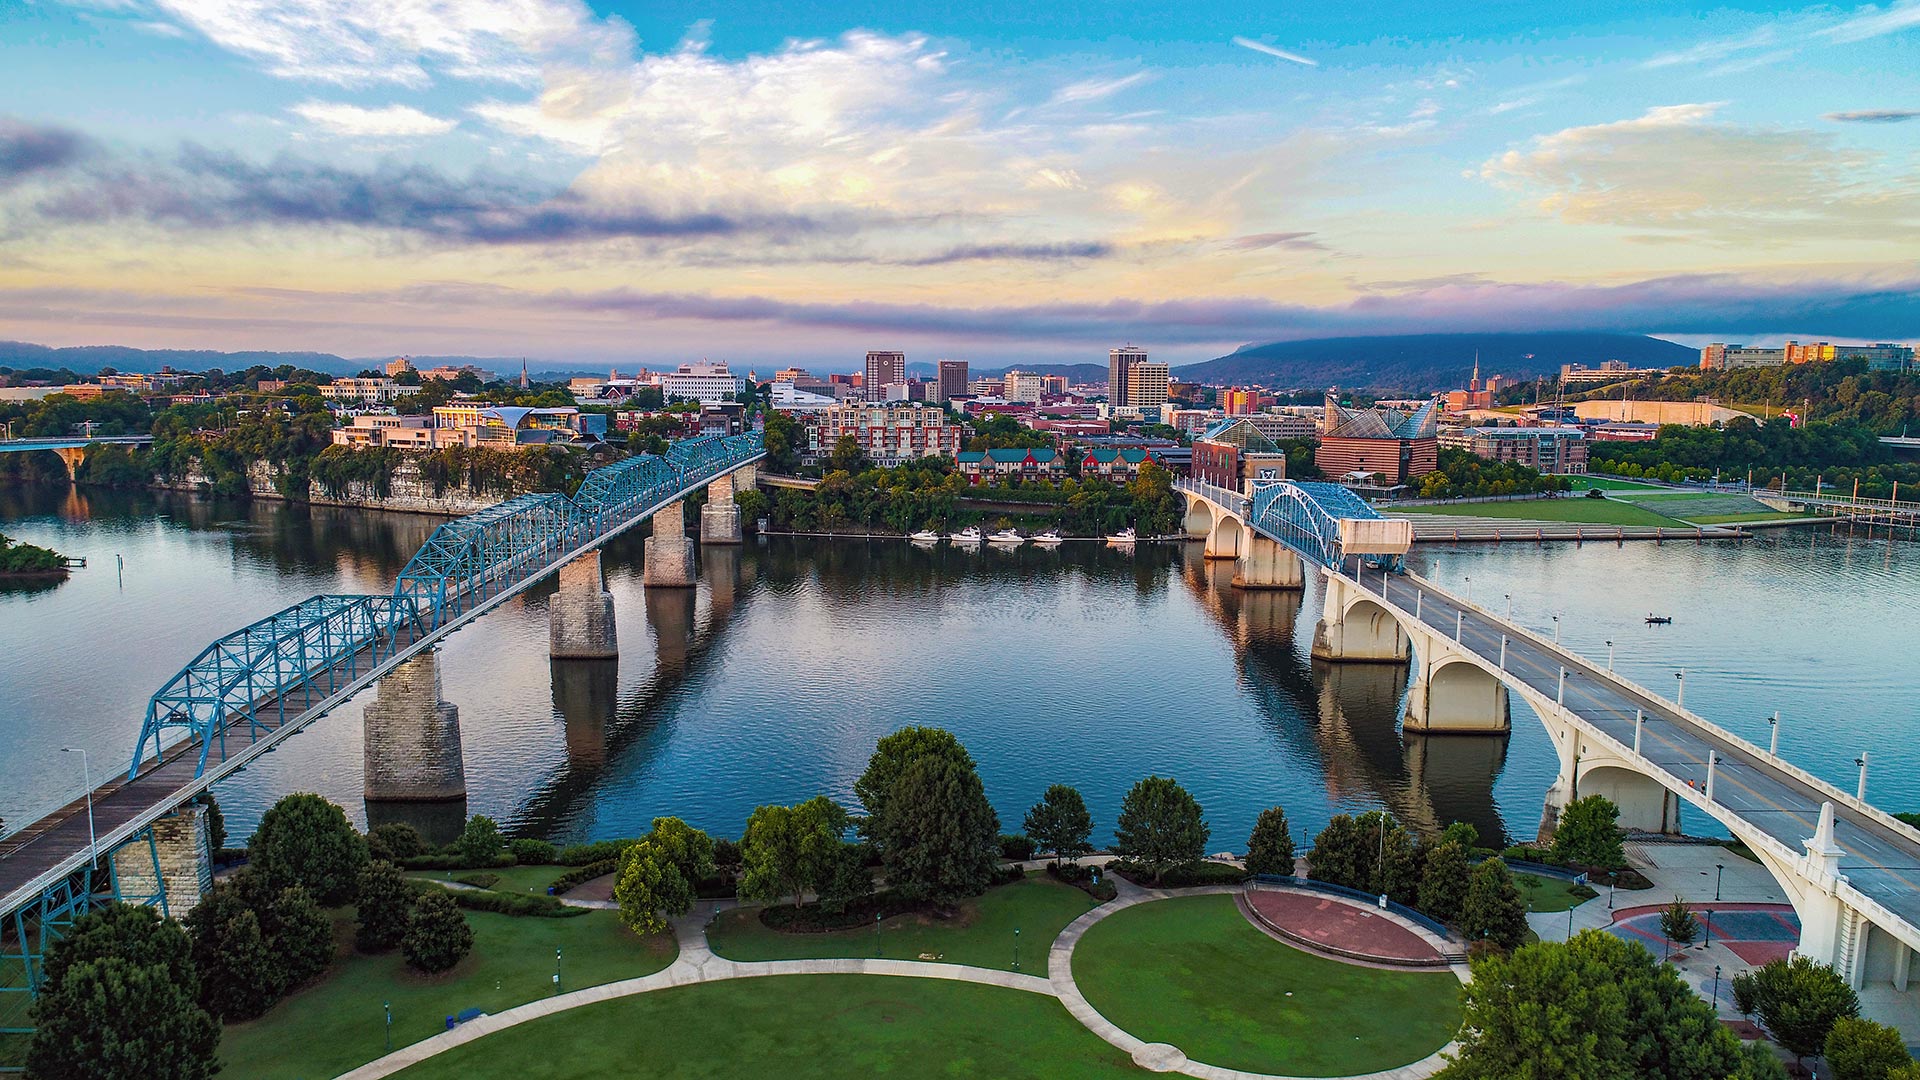 Skyline view of downtown Chattanooga